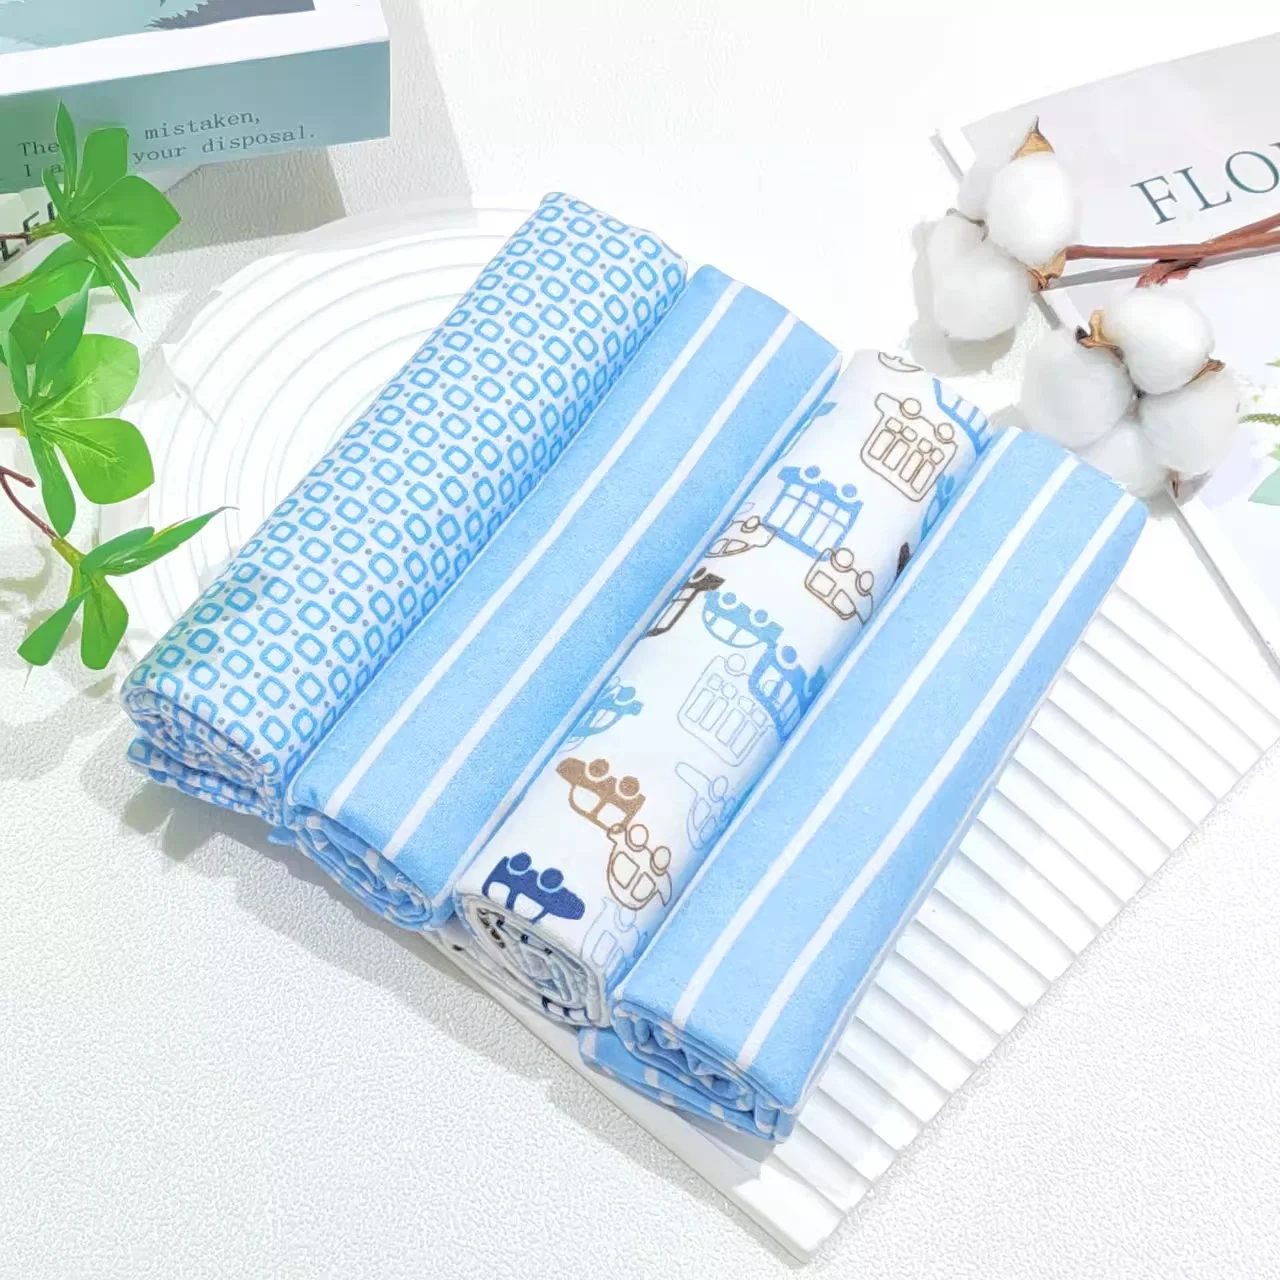 4Pcs/Sets 100% Cotton Flannel Diapers Baby Swaddles Soft Wrap For Baby Girls Boys Supersoft Receiving Bedsheet Print Blankets